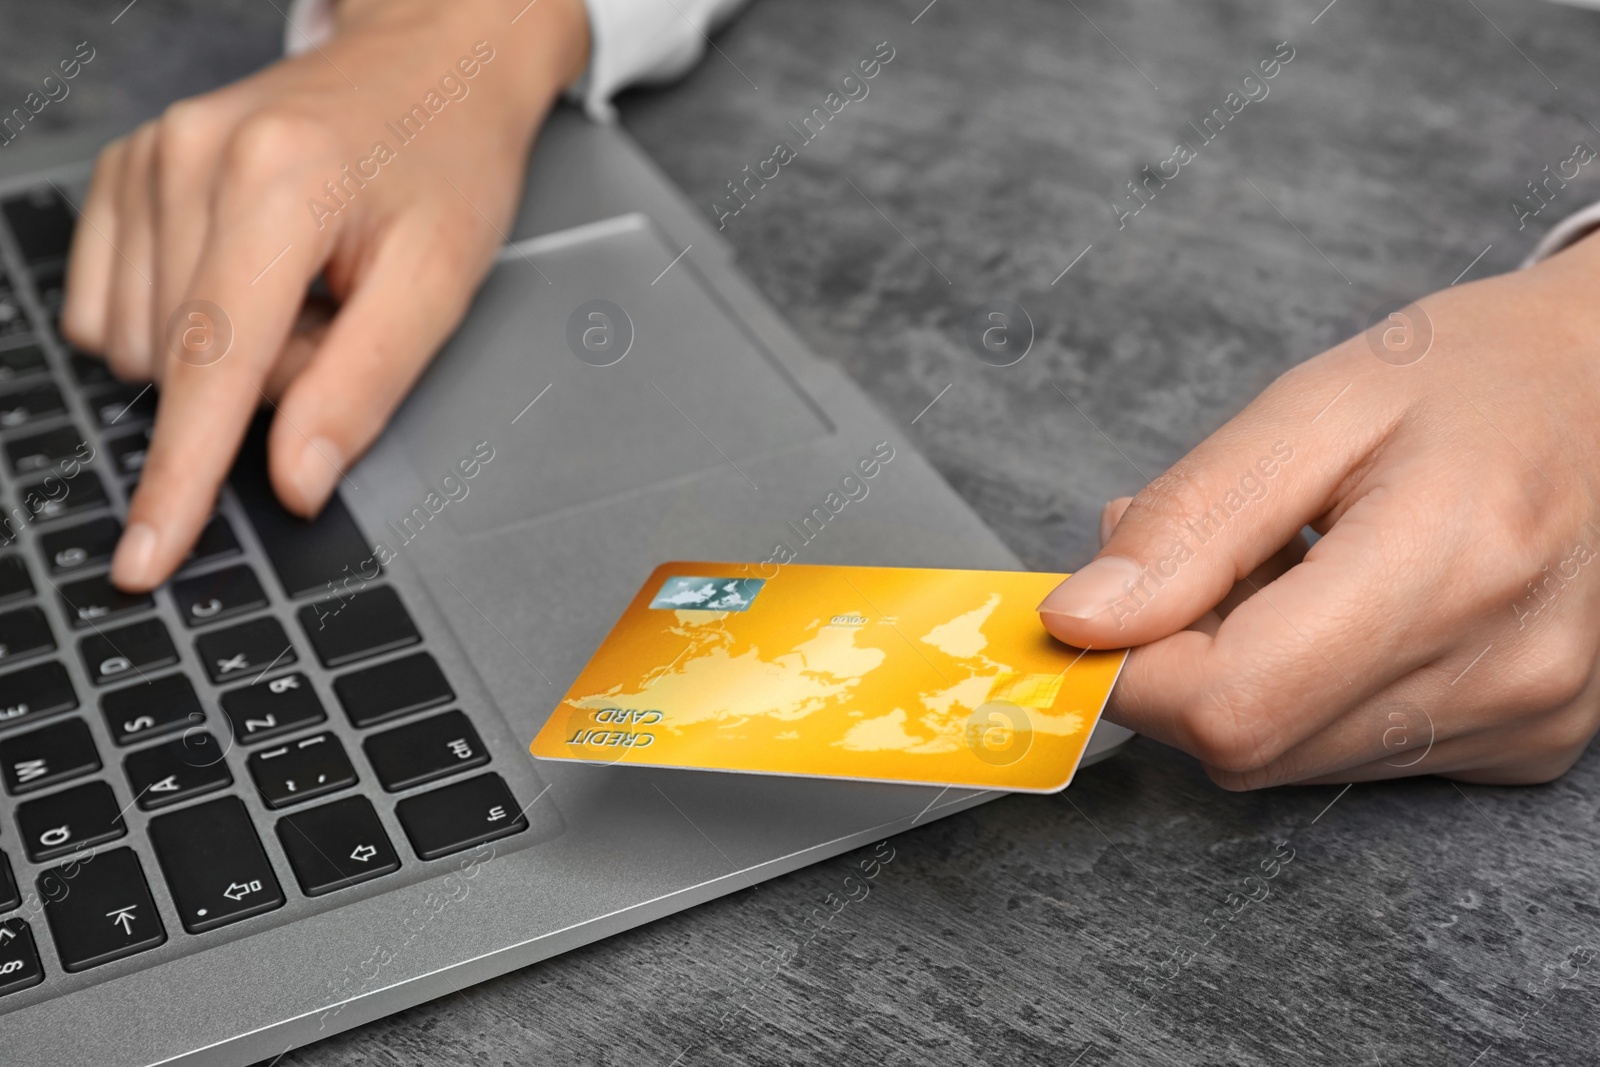 Photo of Woman with credit card using laptop at table